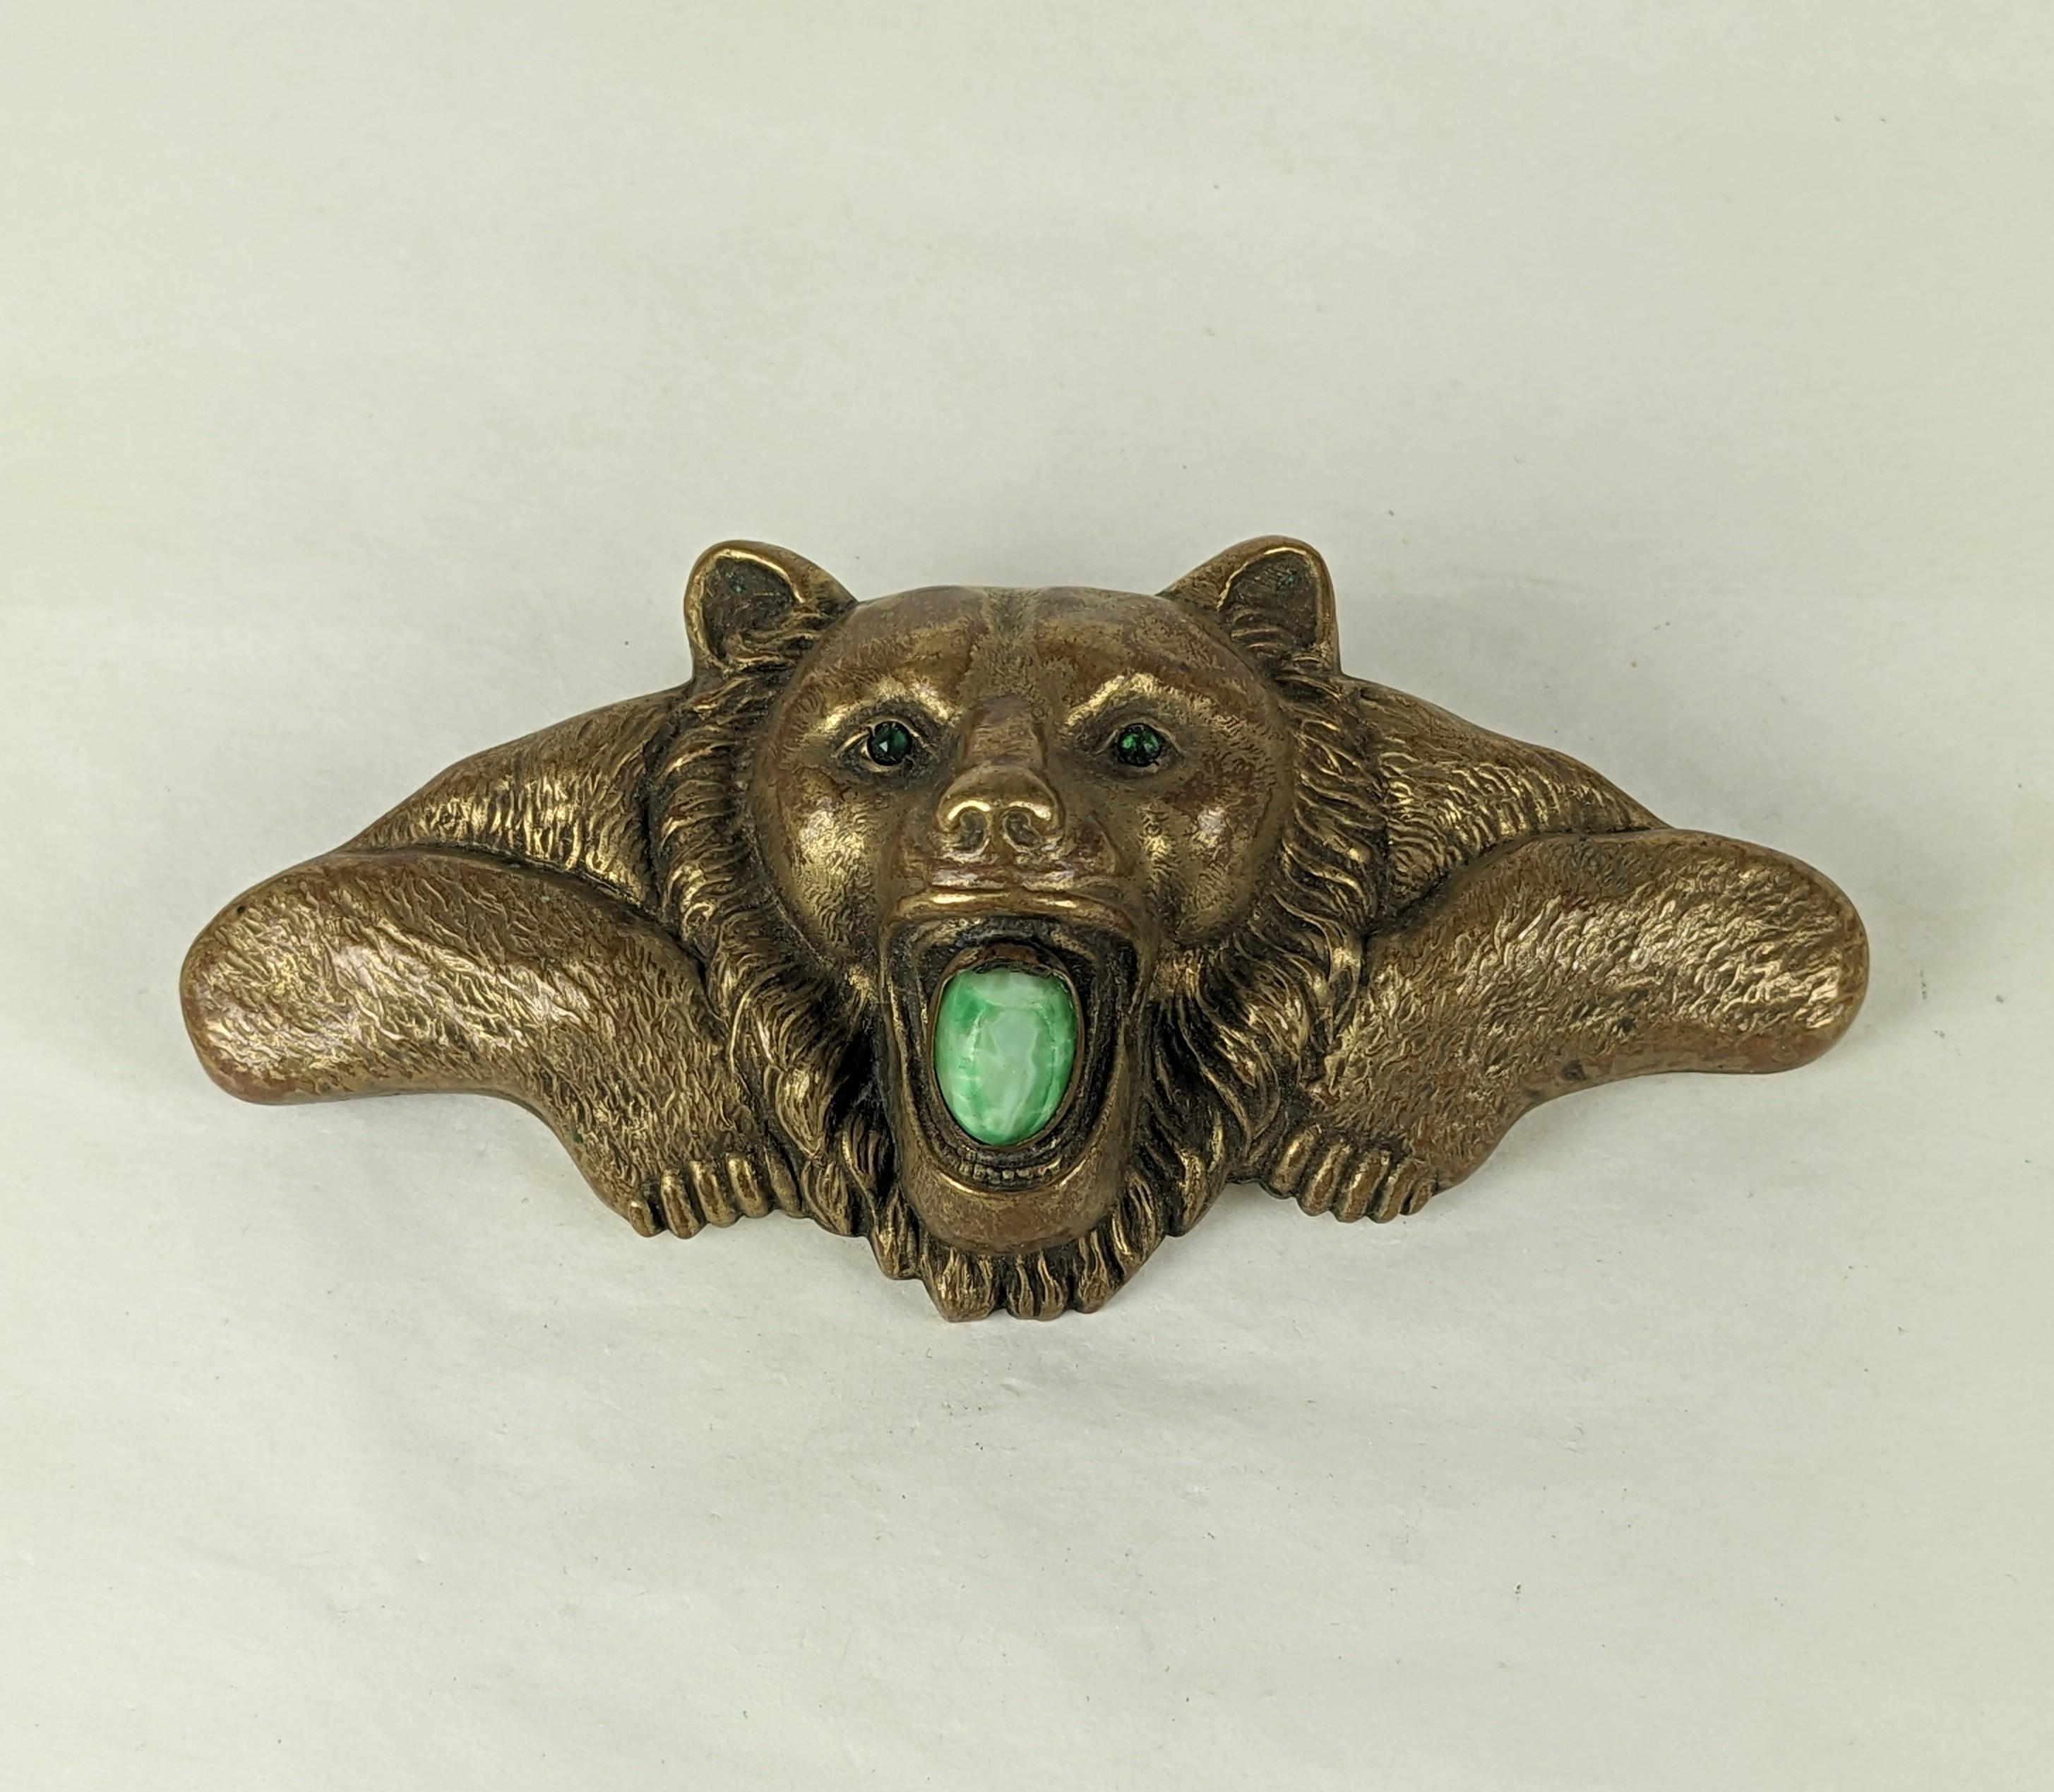 Massive Victorian Bear Cloak Clasp Brooch from the late 1800's. Large and dimensional, with beautiful detailing throughout. The bear has emerald paste eyes and it holds a large faux jade in its mouth (chip). Very unusual and striking size. 1870's.